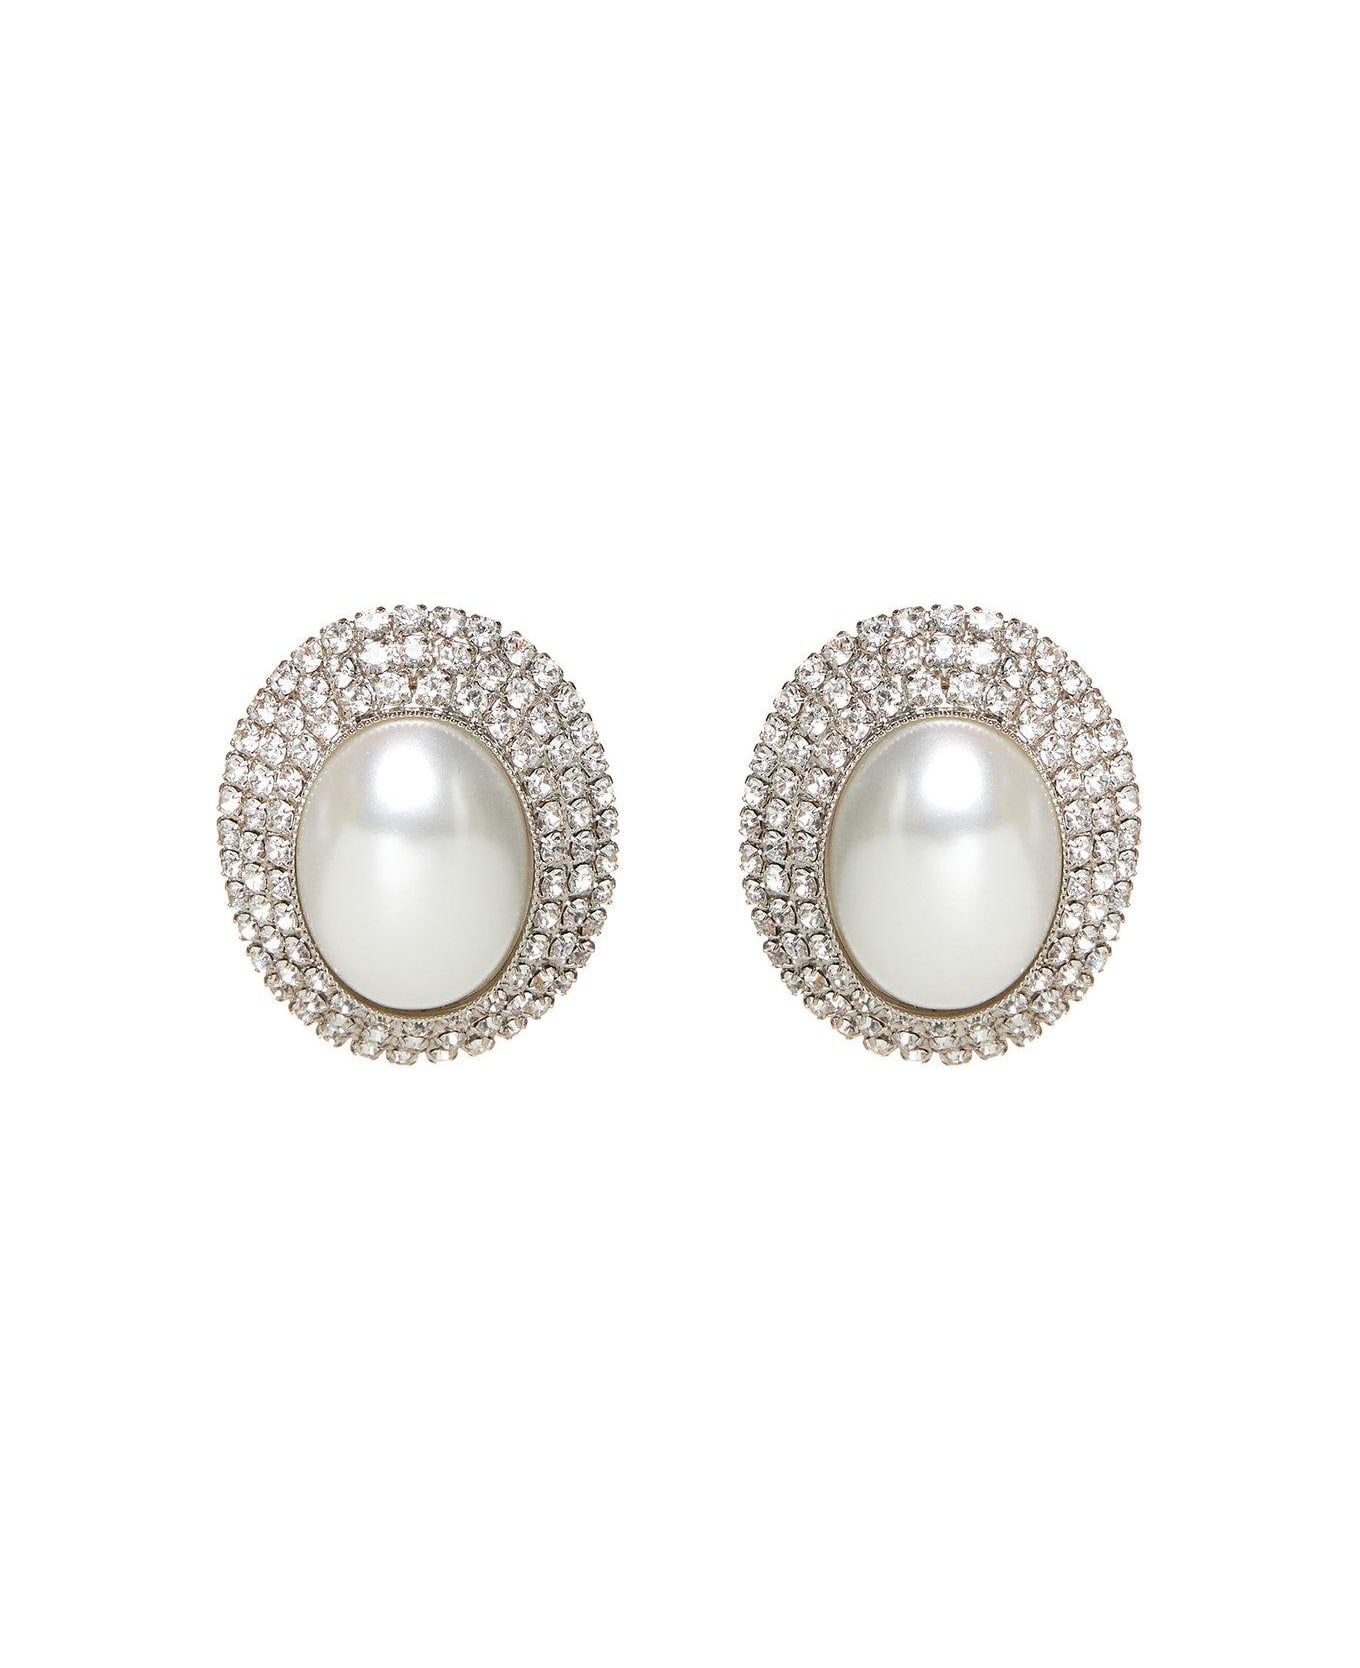 Alessandra Rich Embellished Clip-on Earrings - Cry Silver